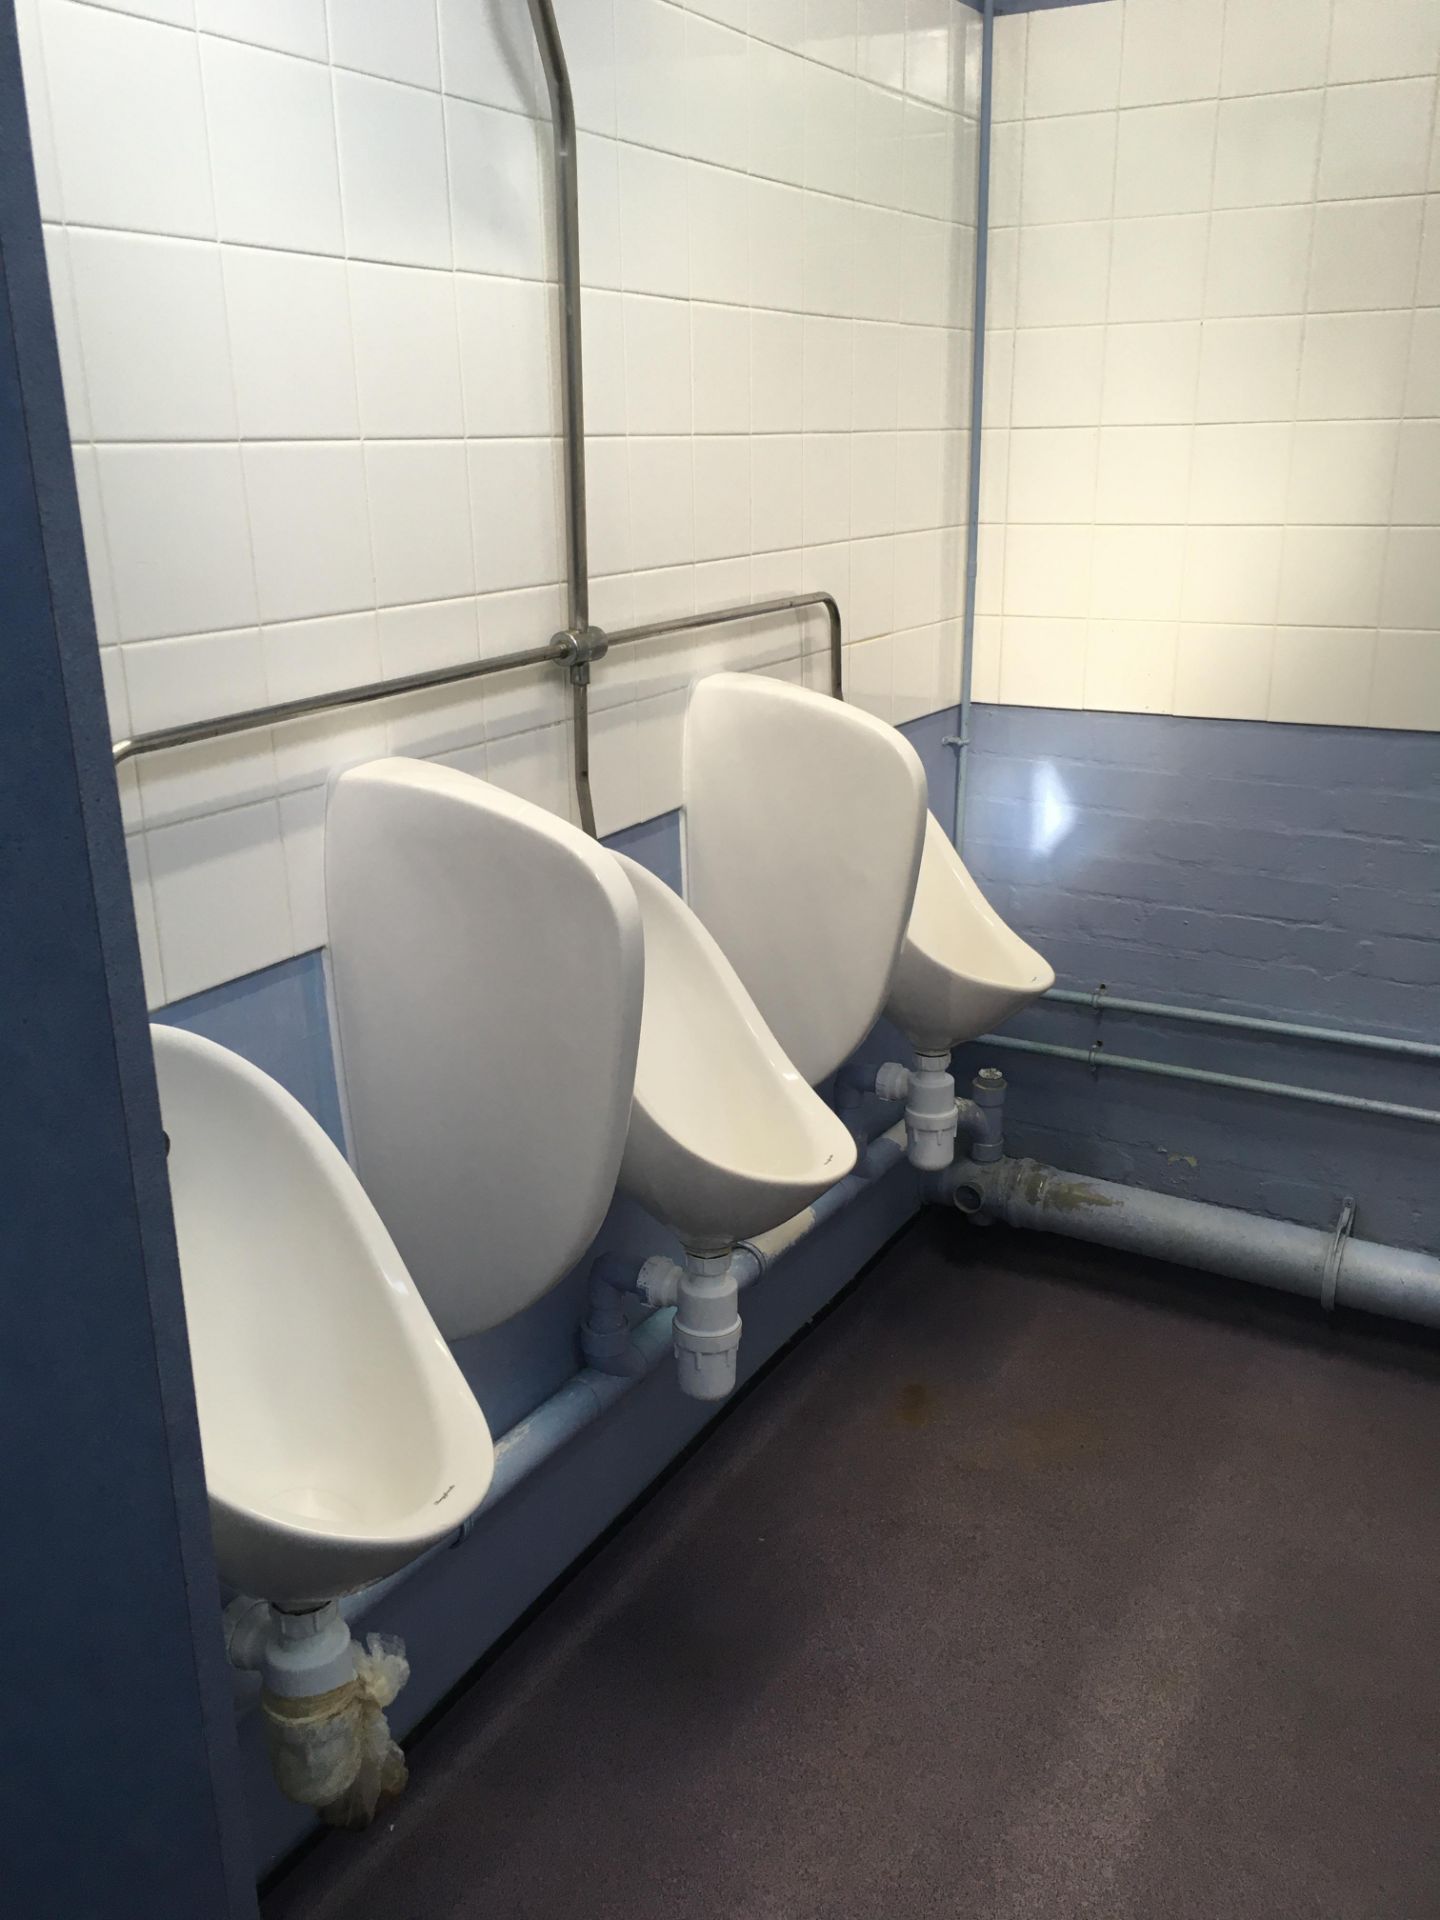 Contents of the gents toilet, 3 x urinals, 3 x sinks, hand drier, 3 x mirrors, 1 x cubicle - Image 2 of 5